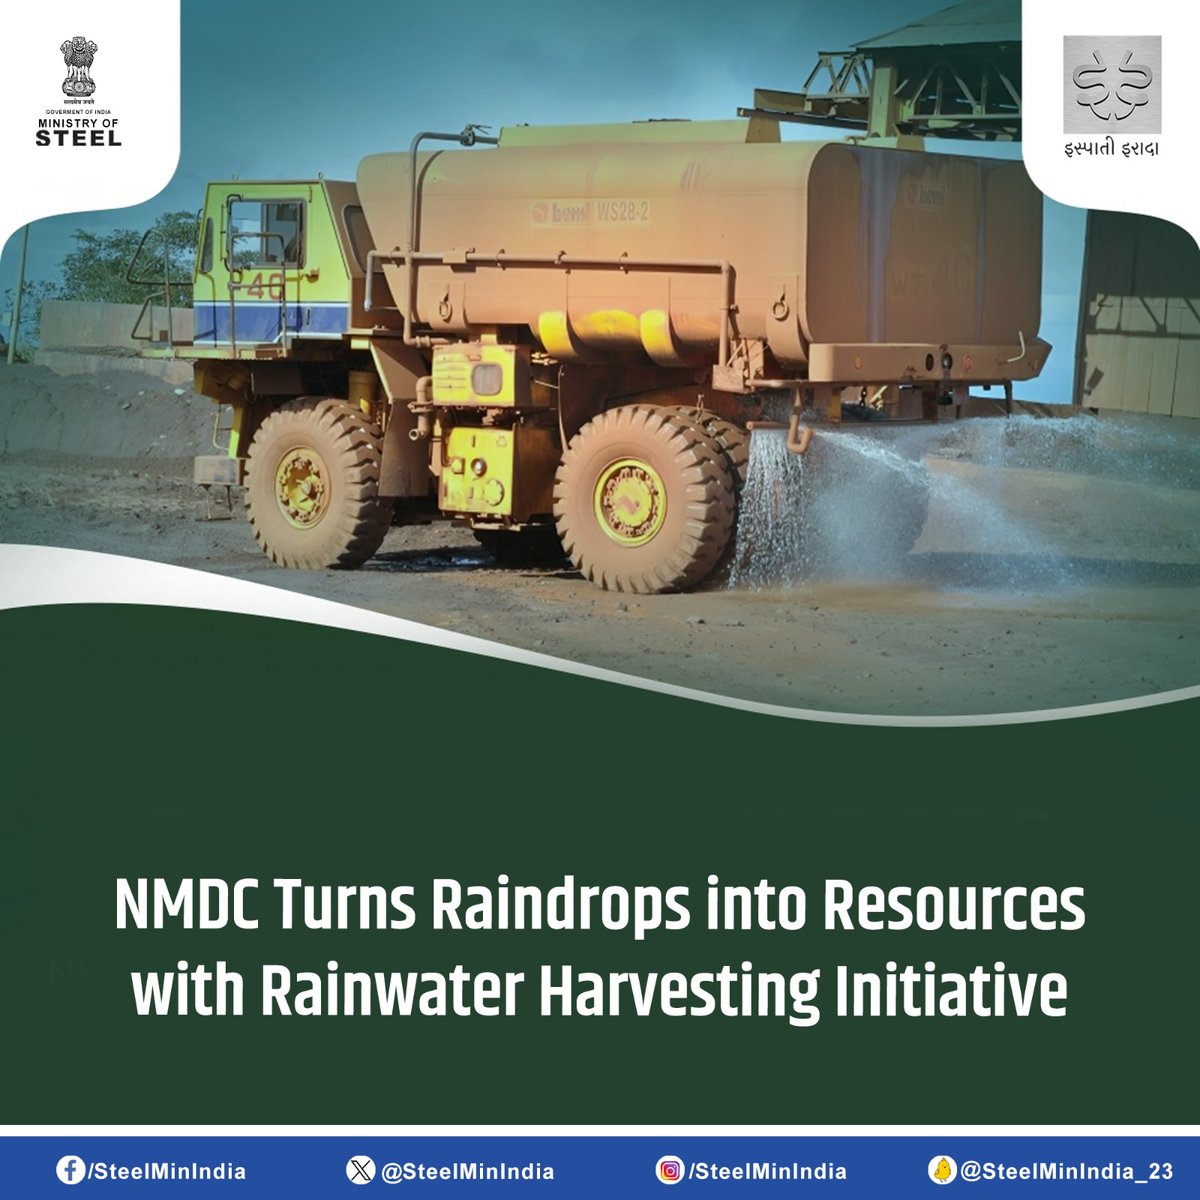 #NMDC's innovative #RainwaterHarvesting initiative captures & retains rainwater across projects, reusing it for dust suppression & green belt development. This will help reduce dependence on surface water by utilizing well-constructed harvesting structures for operational use.